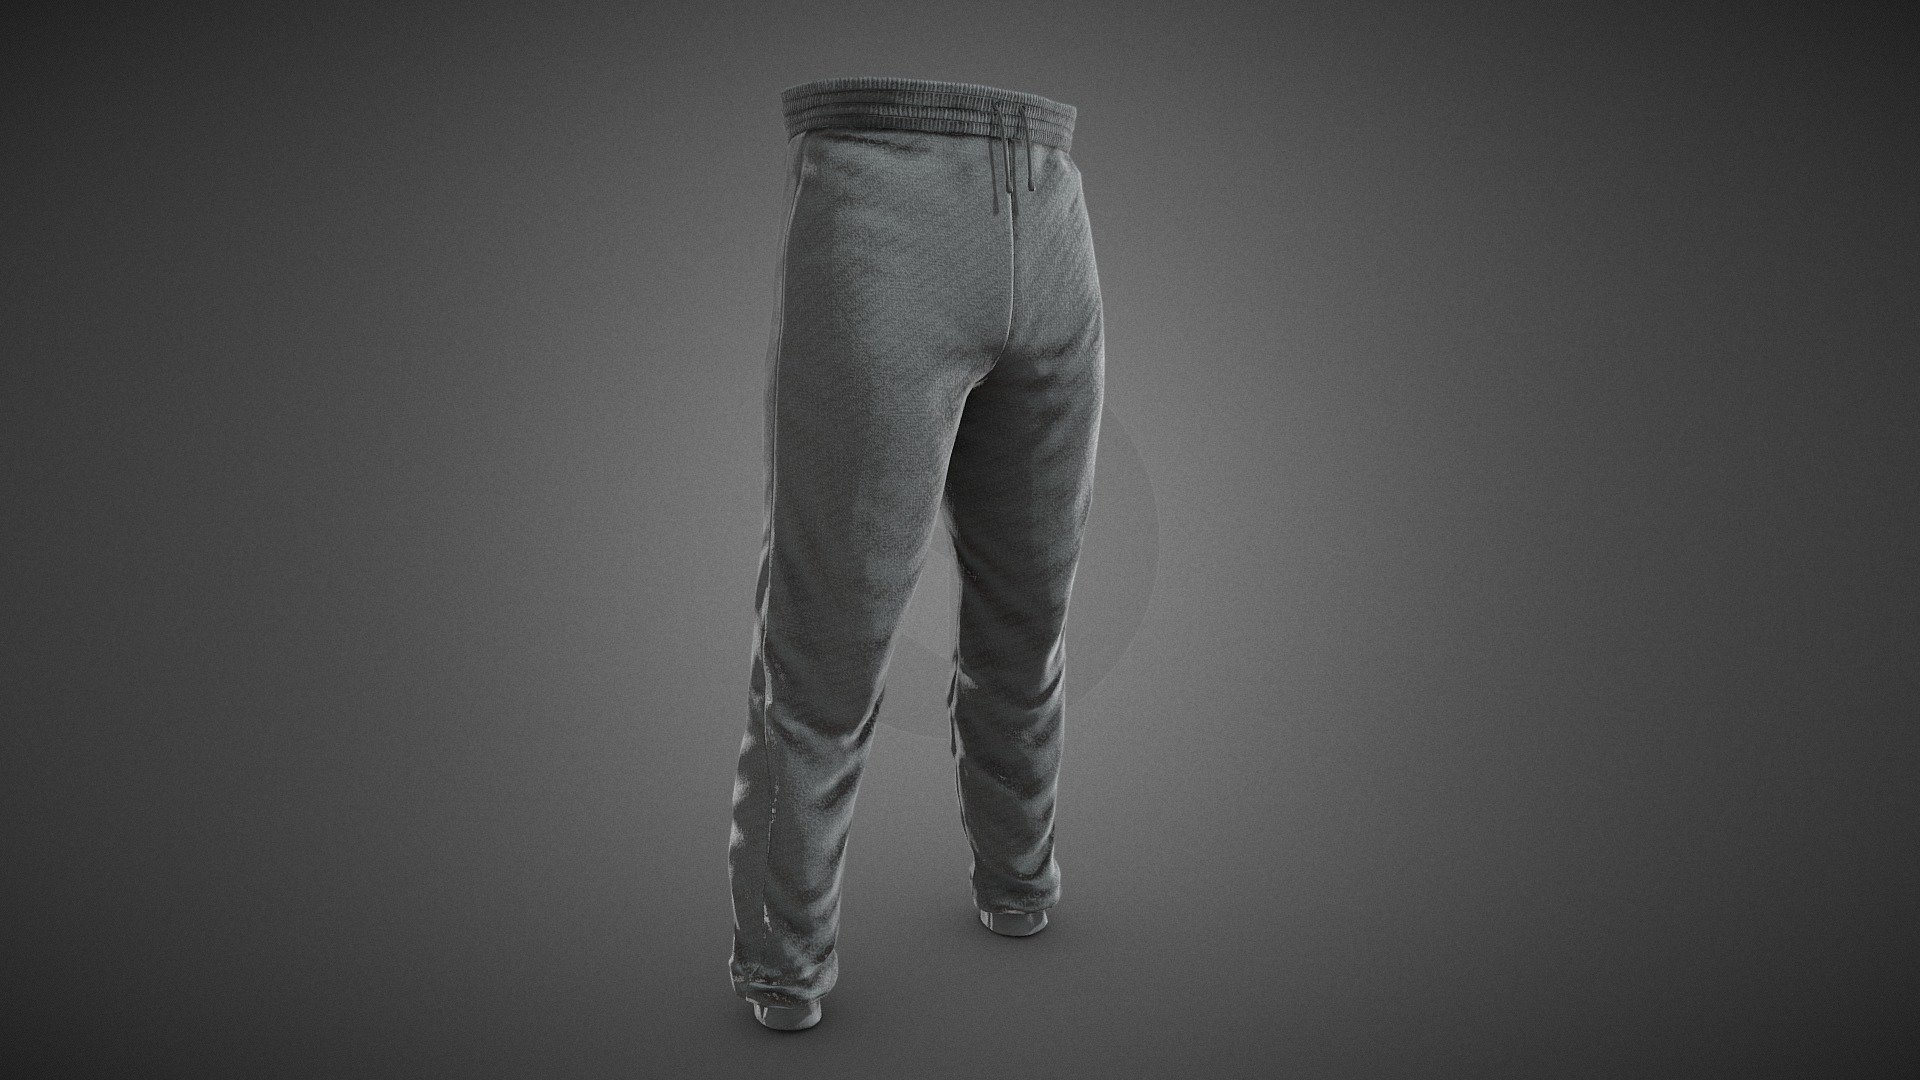 CG StudioX Present :
Gray Stonewashed Jogger Pants lowpoly/PBR




This is Gray Stonewashed Jogger Pants Comes with Specular and Metalness PBR.

The photo been rendered using Marmoset Toolbag 4 (real time game engine )


Features :



Comes with Specular and Metalness PBR 4K texture .

Good topology.

Low polygon geometry.

The Model is prefect for game for both Specular workflow as in Unity and Metalness as in Unreal engine .

The model also rendered using Marmoset Toolbag 4 with both Specular and Metalness PBR and also included in the product with the full texture.

The texture can be easily adjustable .


Texture :



One set of UV [Albedo -Normal-Metalness -Roughness-Gloss-Specular-Ao] (4096*4096)


Files :
Marmoset Toolbag 4 ,Maya,,FBX,OBj with all the textures.




Contact me for if you have any questions.
 - Gray Stonewashed Jogger Pants - Buy Royalty Free 3D model by CG StudioX (@CG_StudioX) 3d model